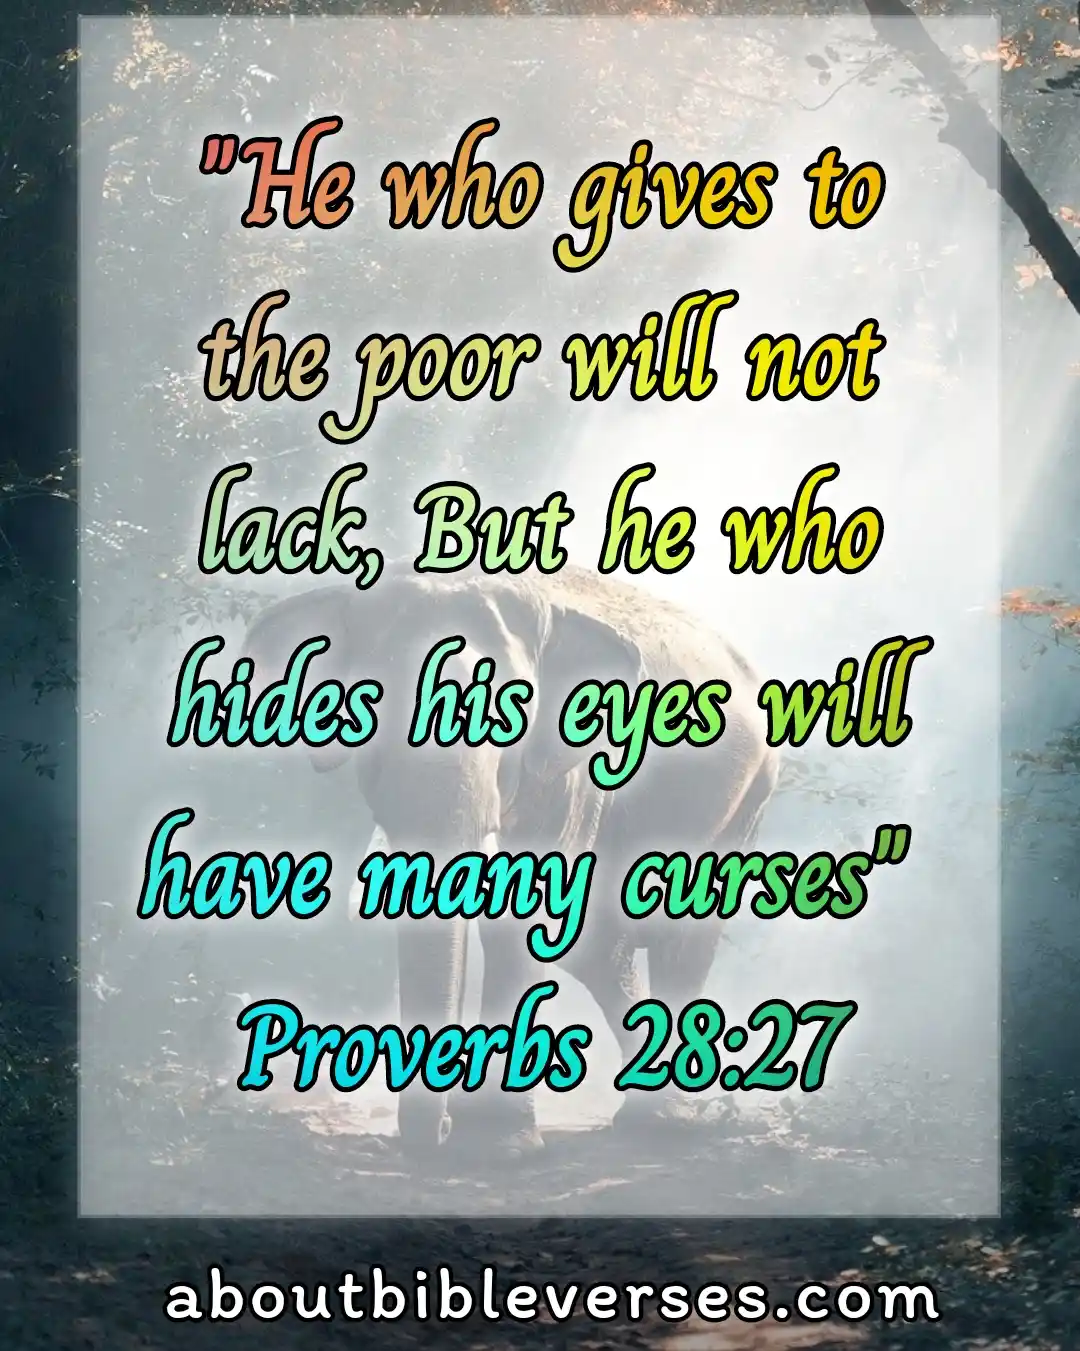 Bible Verse About Helping And Giving To The Poor (Proverbs 28:27)